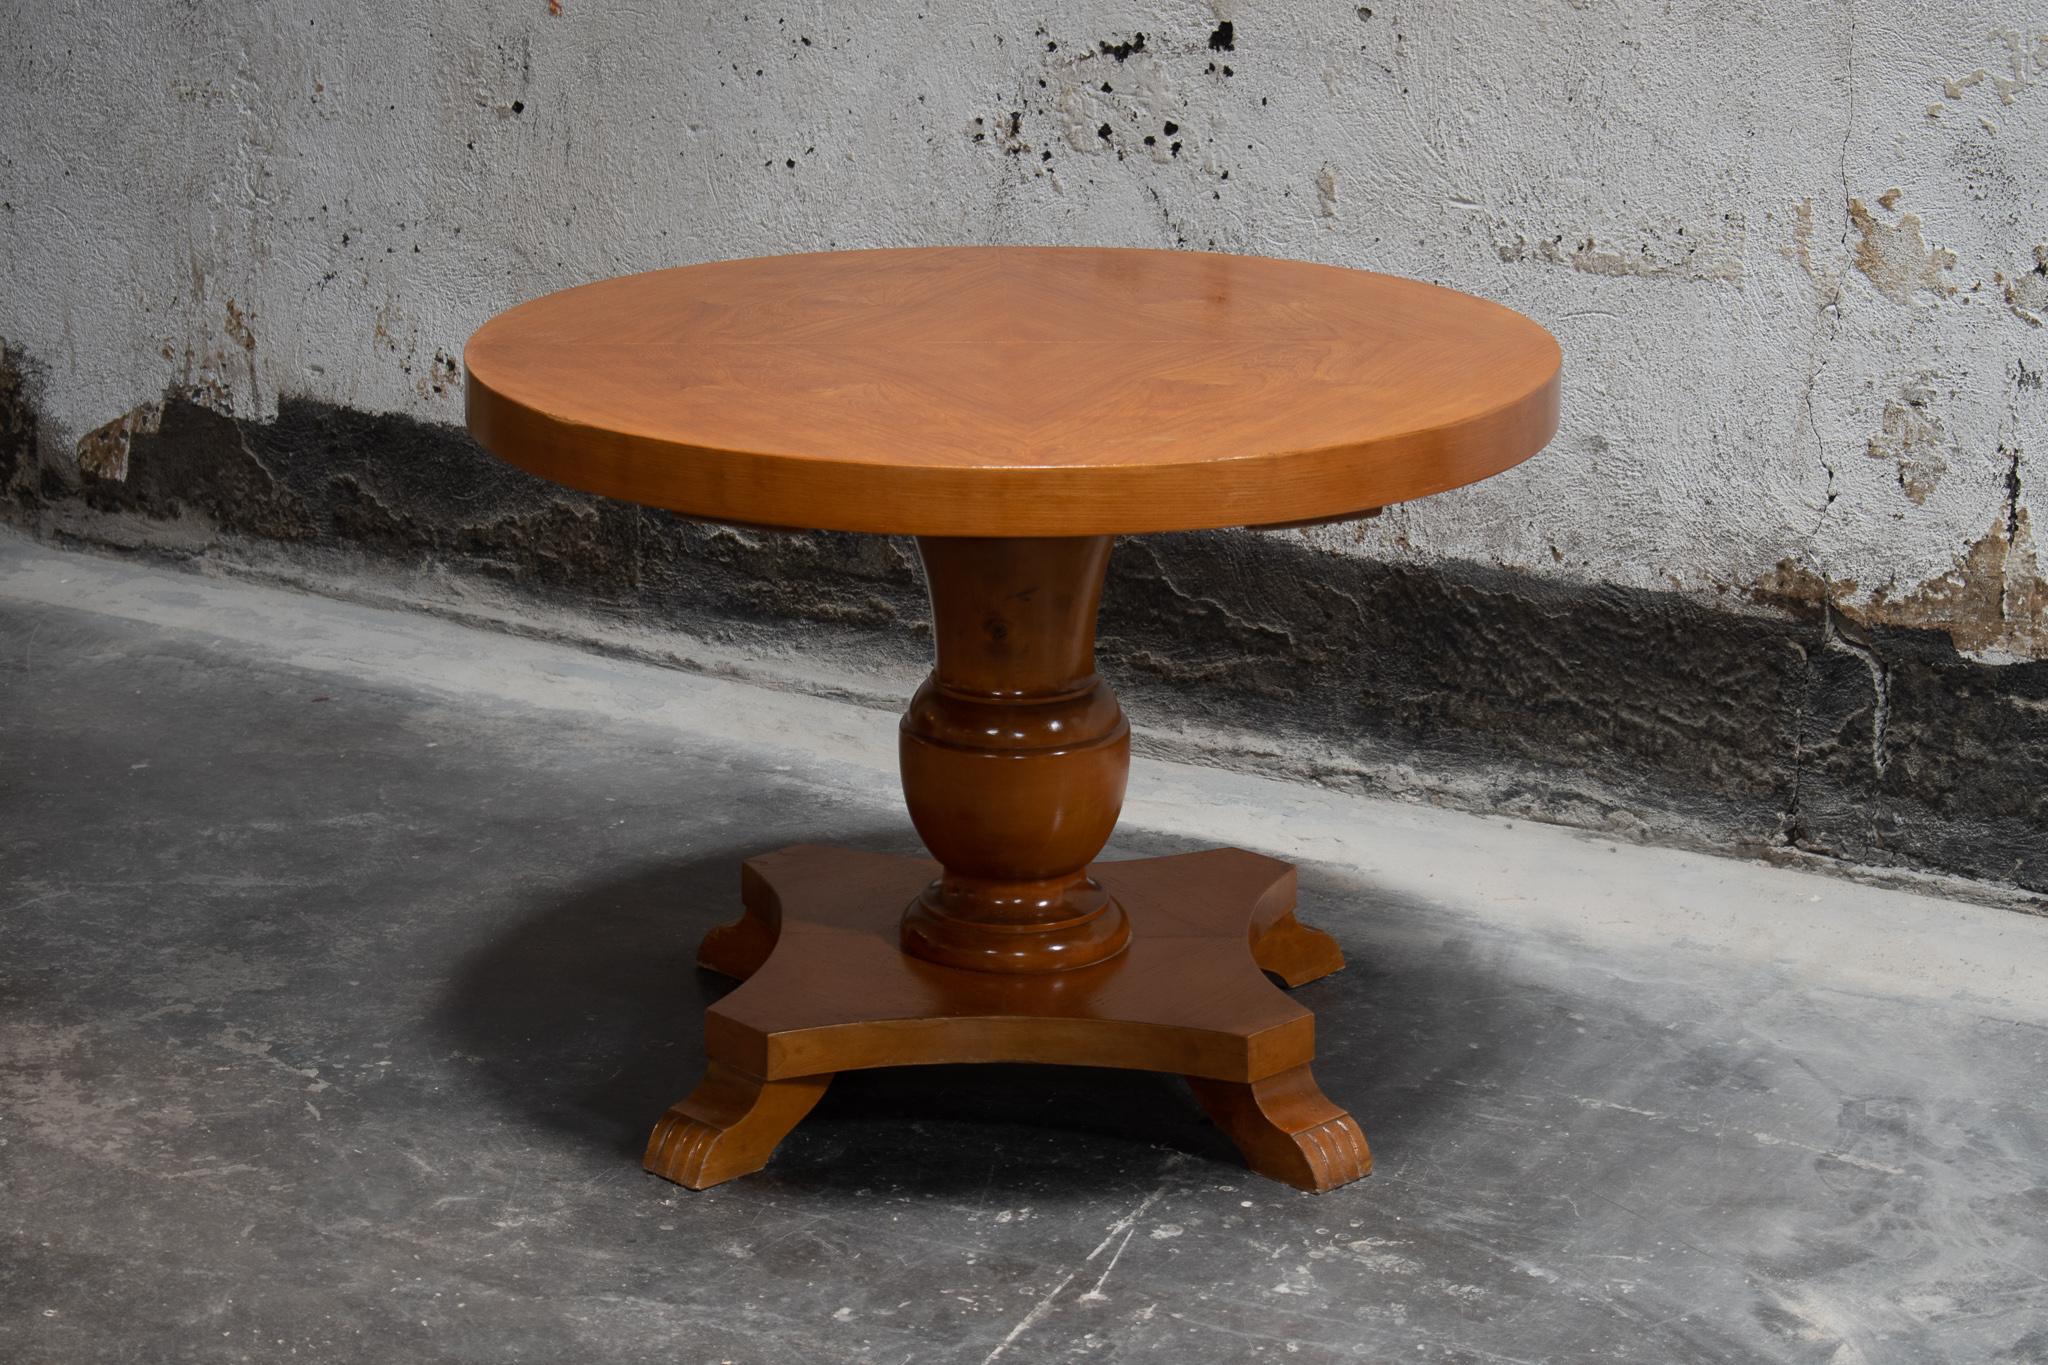 Art Moderne elm end table from Sweden, circa 1930. Originally used in Sweden as a 